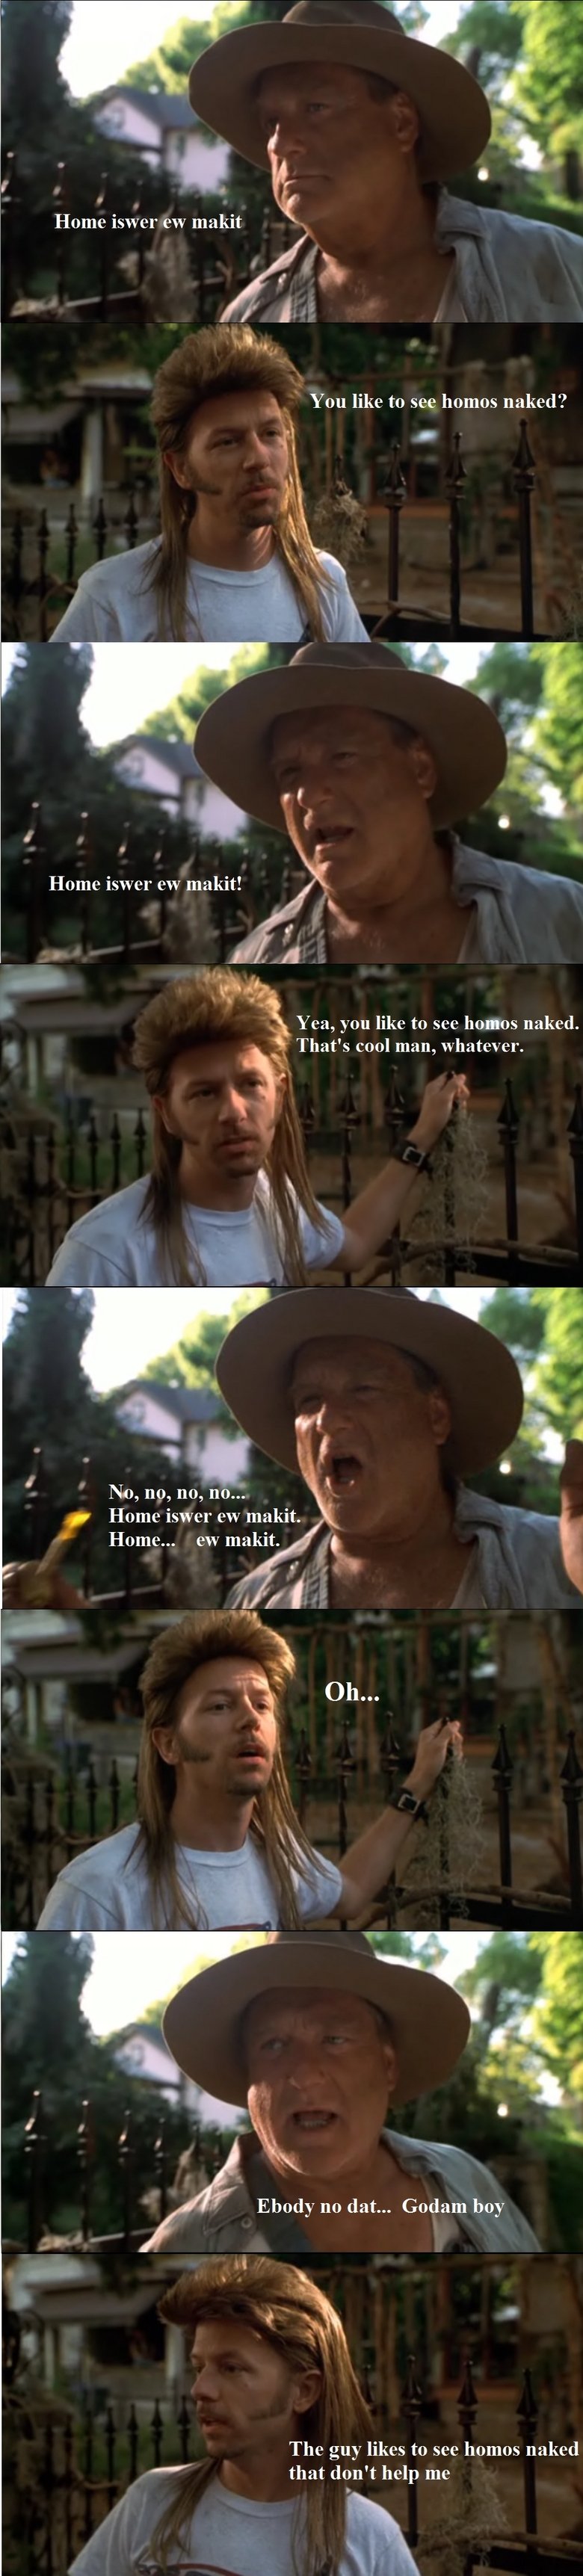 Q280421149 Joe Dirt You Like To See Homos Naked Vintage T 